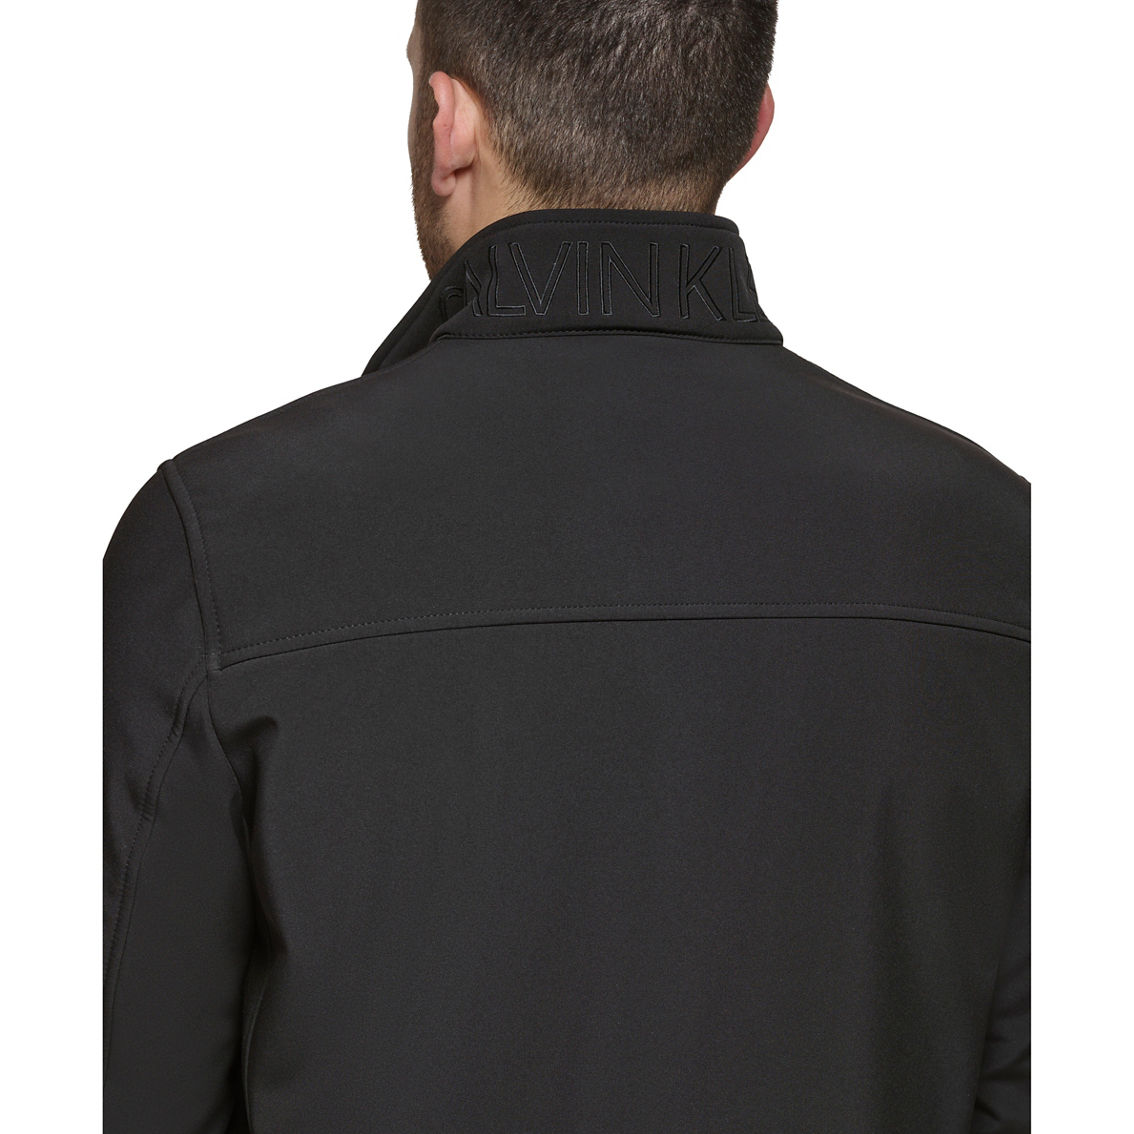 Calvin Klein Soft Shell Jacket - Image 8 of 10